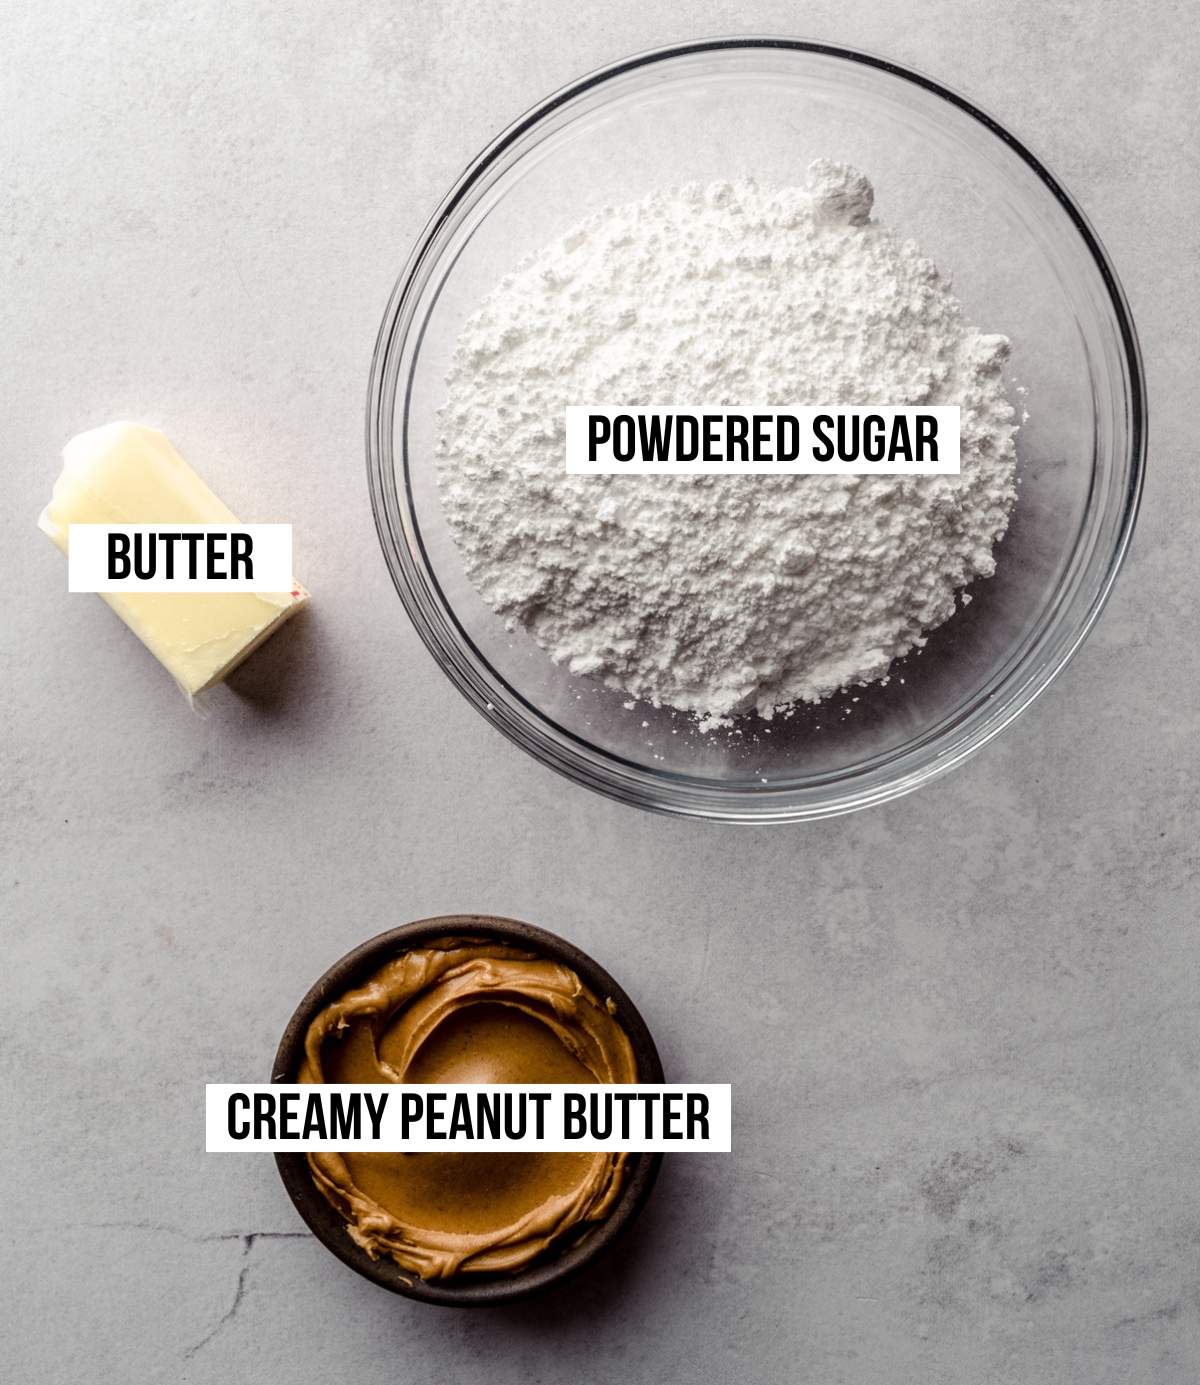 Aerial photo of ingredients to make peanut butter Easter eggs with text overlay.